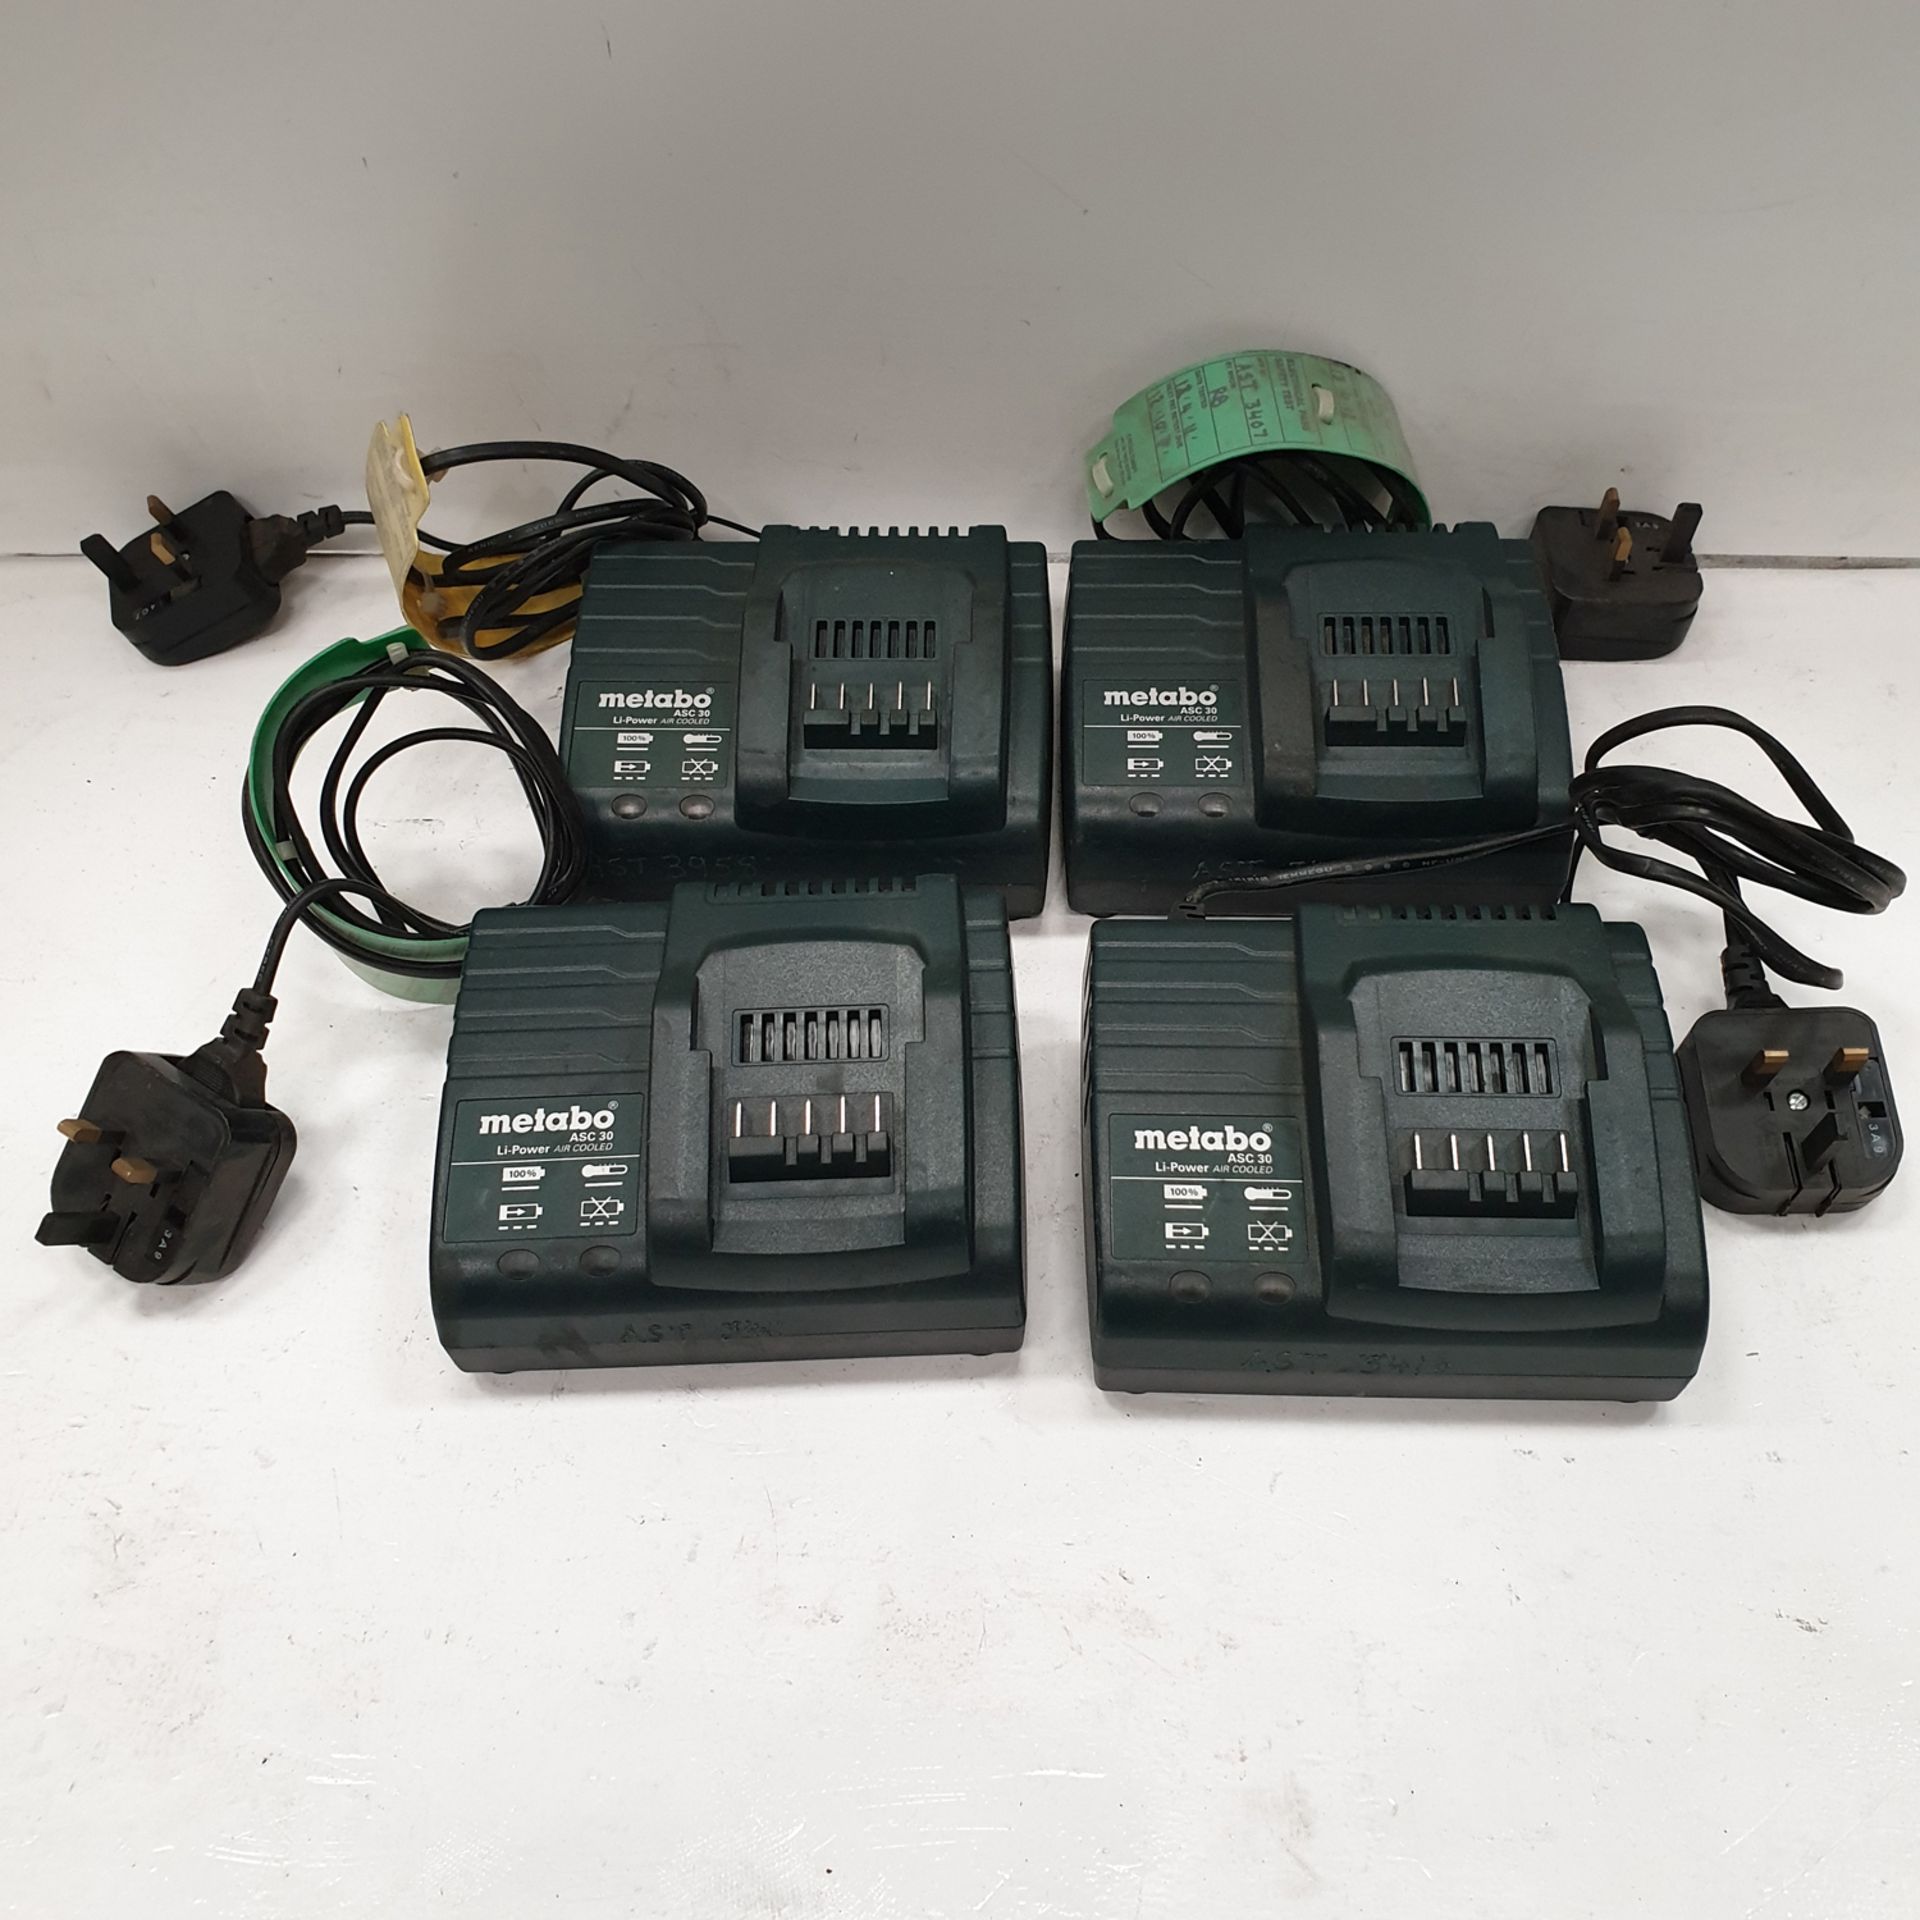 4 x Metabo ASC 30 Battery Chargers. 220-240 Volt.